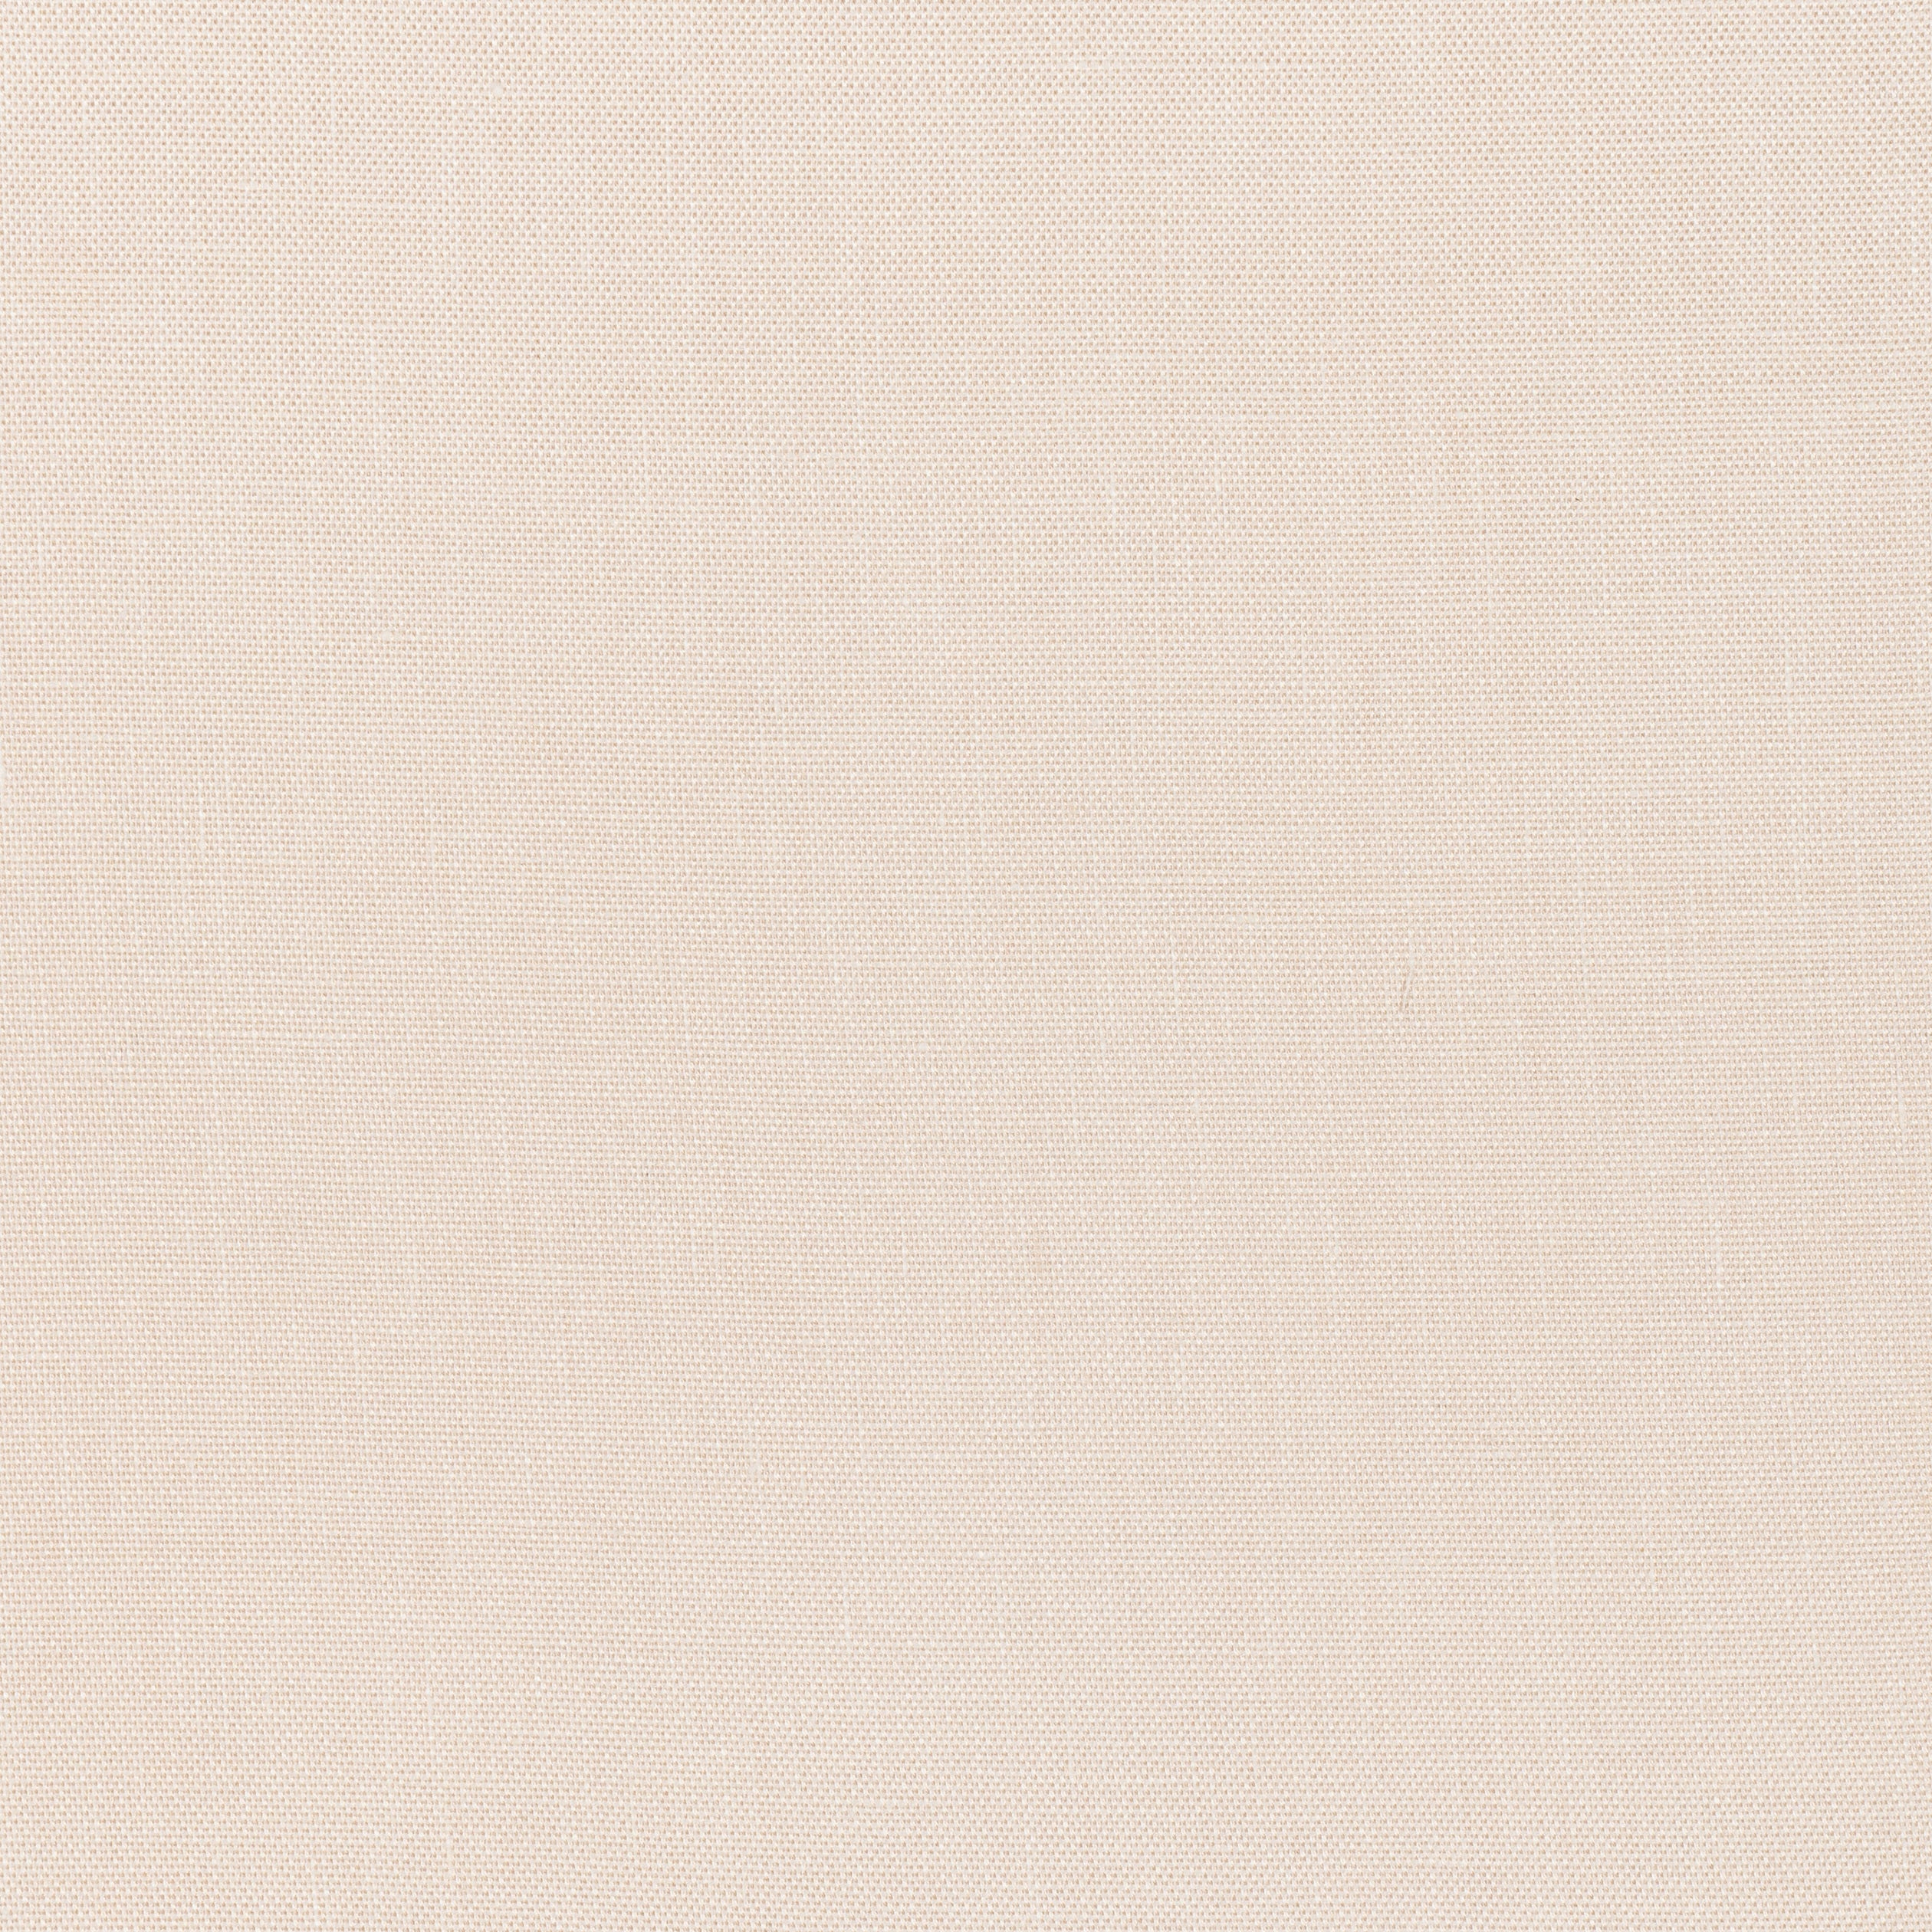 Skye Linen fabric in blush color - pattern number FWW7608 - by Thibaut in the Palisades collection